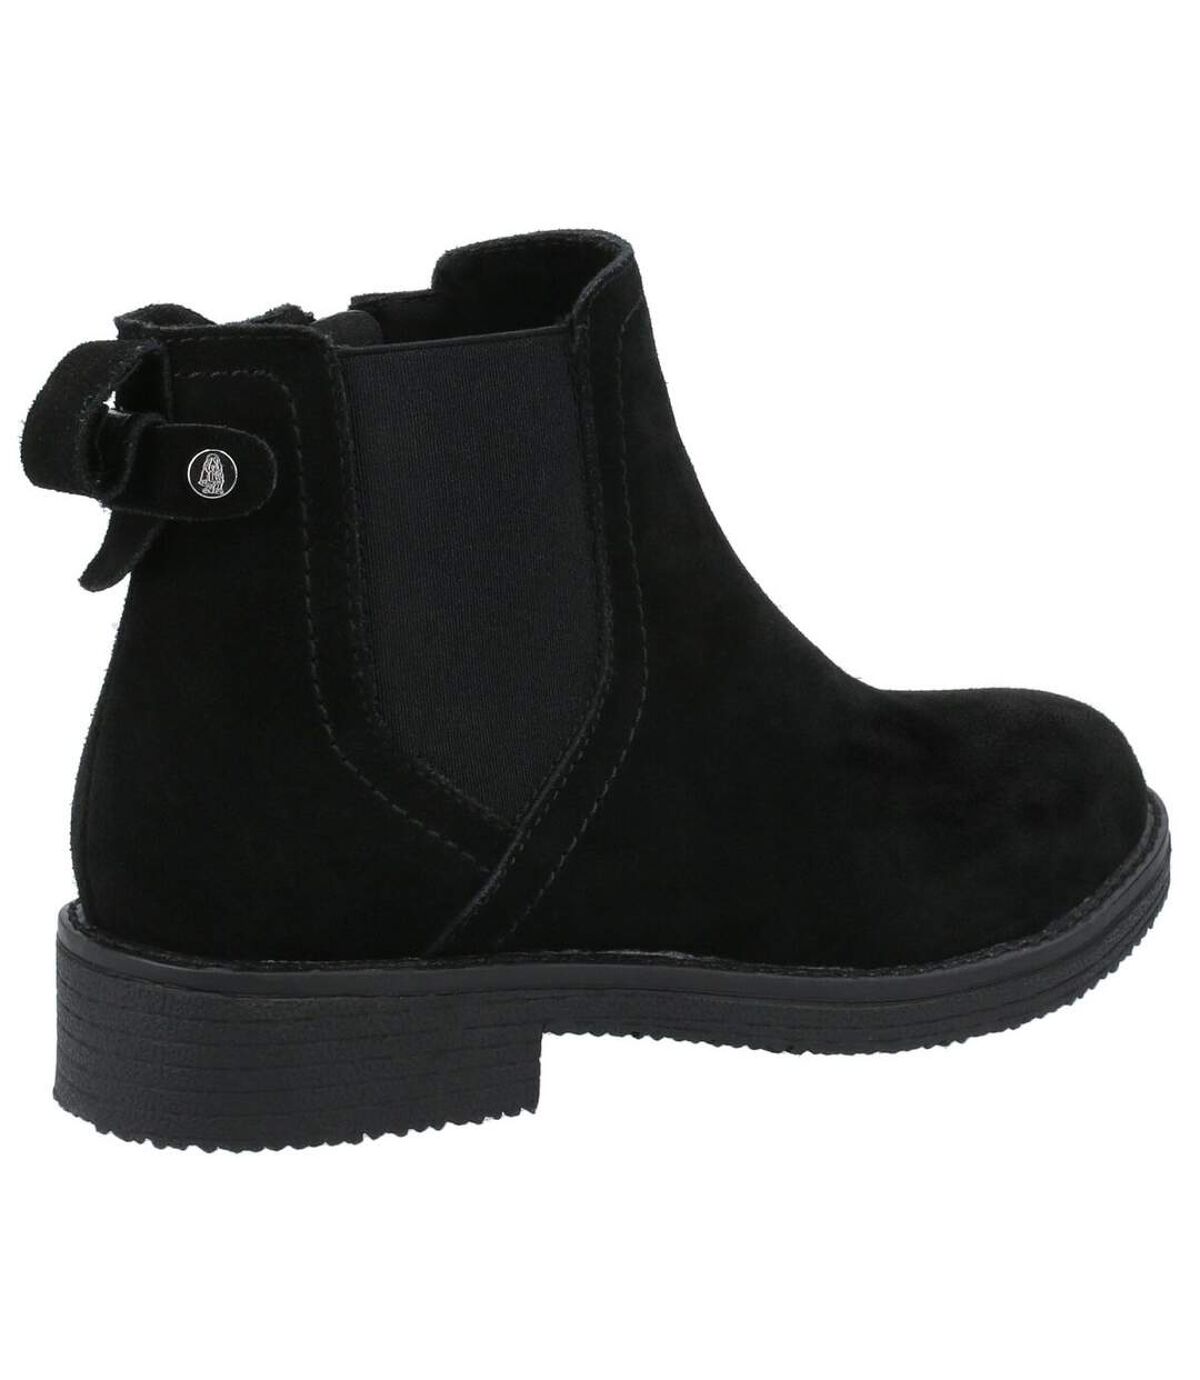 Hush Puppies Womens/Ladies Maddy Suede Ankle Boots (Black) - UTFS7392